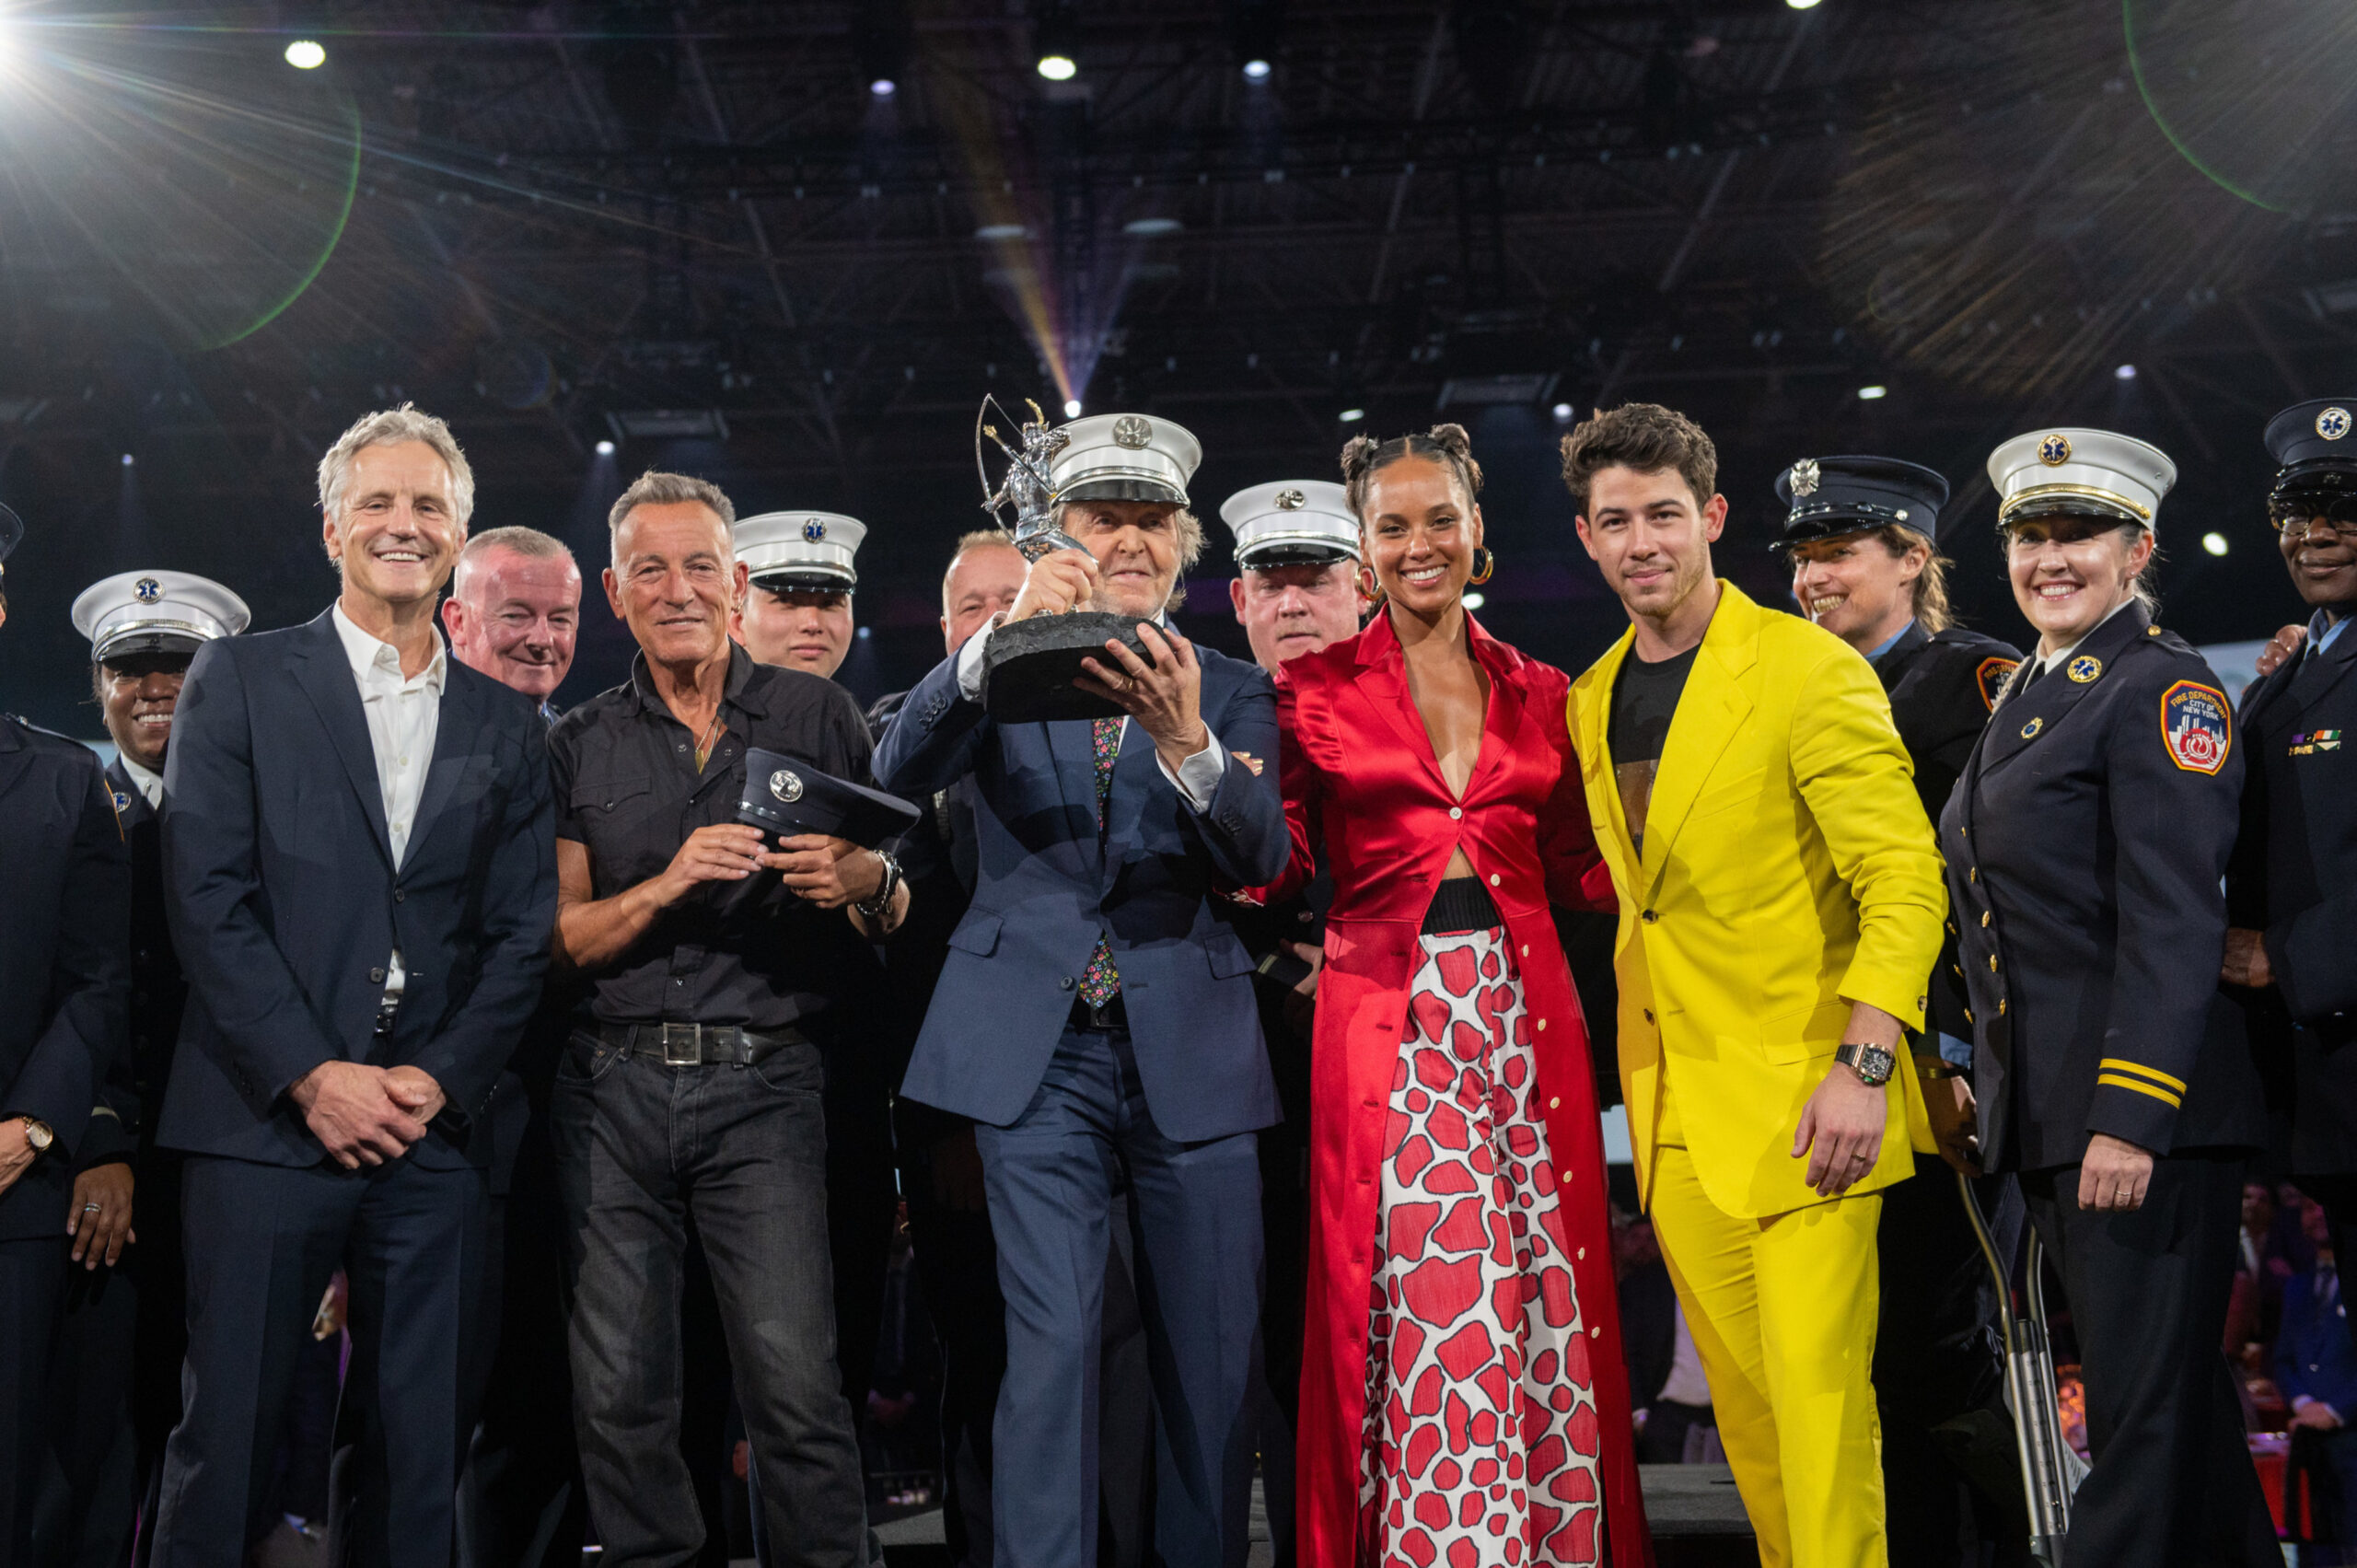 John Sykes, Bruce Springsteen, Alicia Keys, Nick Jonas and a group of a group of New York City firefighters present Paul McCartney with Robin Hood’s prestigious Silver Archer Award for his two-decade long partnership with the organization. Source: Getty Images